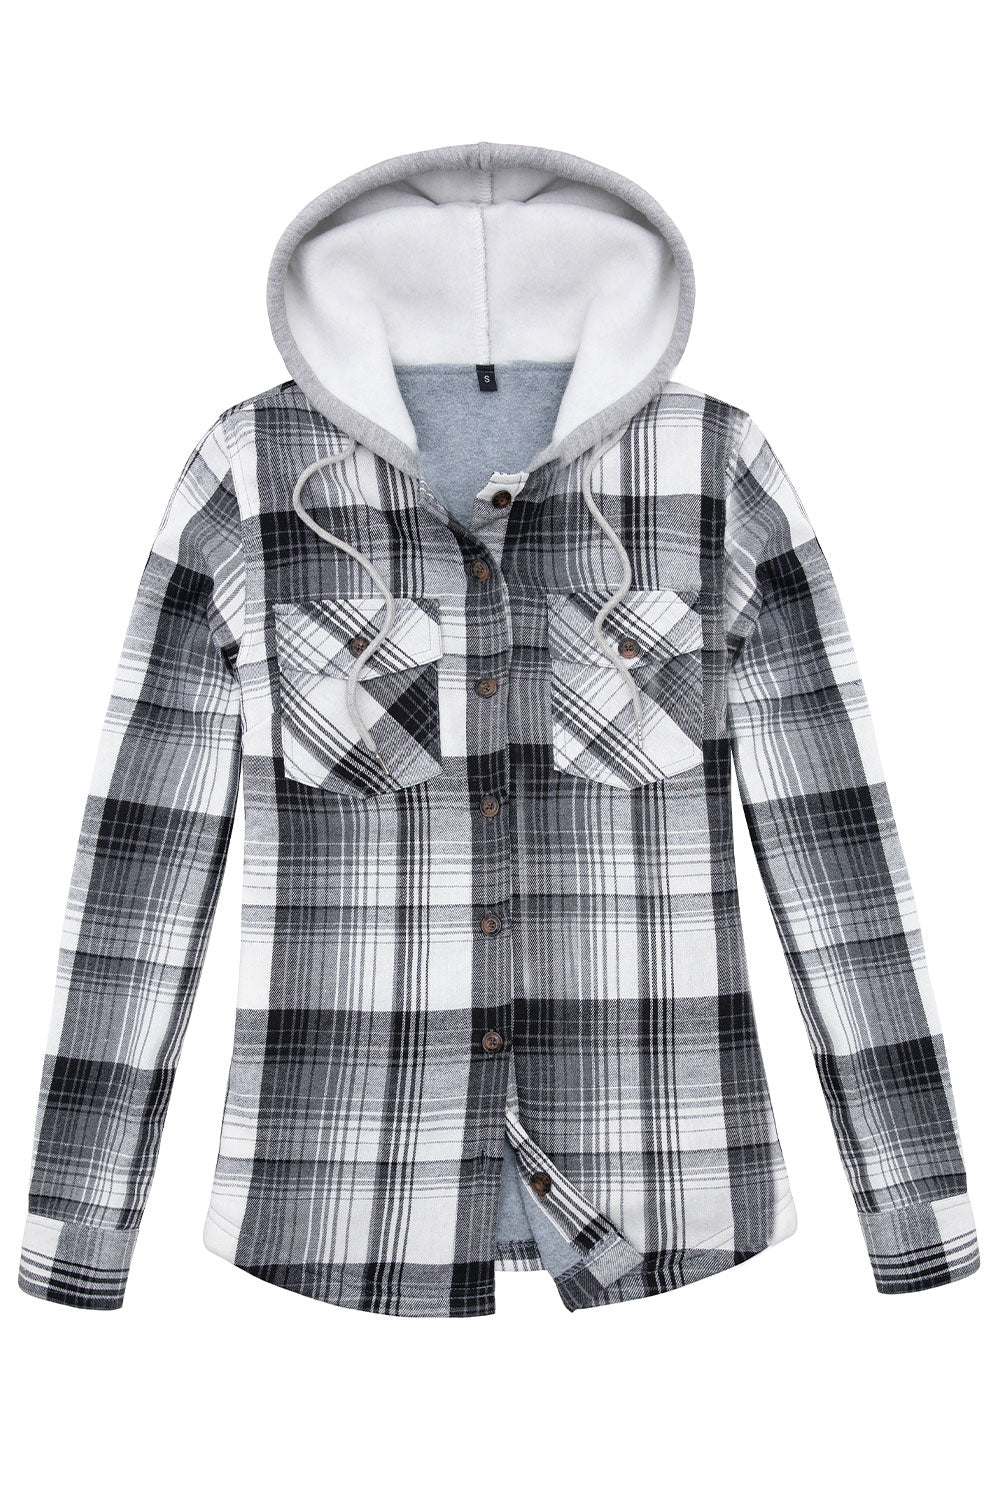 Opomelo Mens Plaid Hoodie Flannel Shirts - Casual Button Down Long Sleeve  Lightweight Shirt Jackets